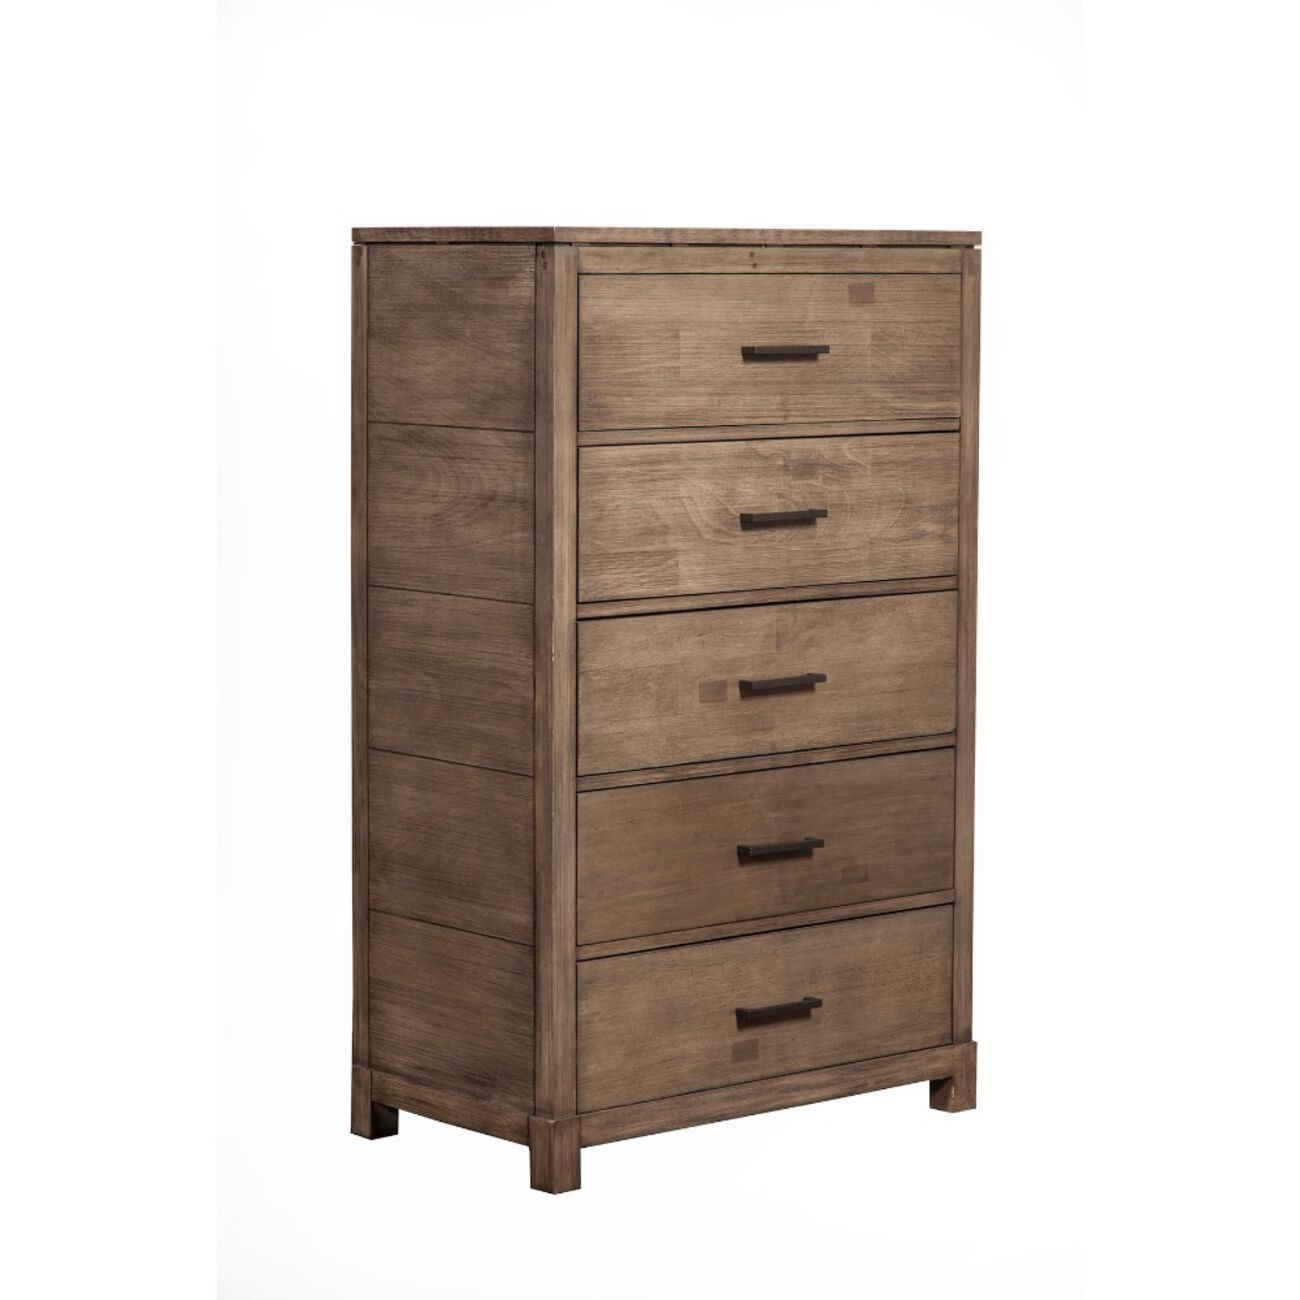 Wooden Chest with 5 Storage Drawers, Brown